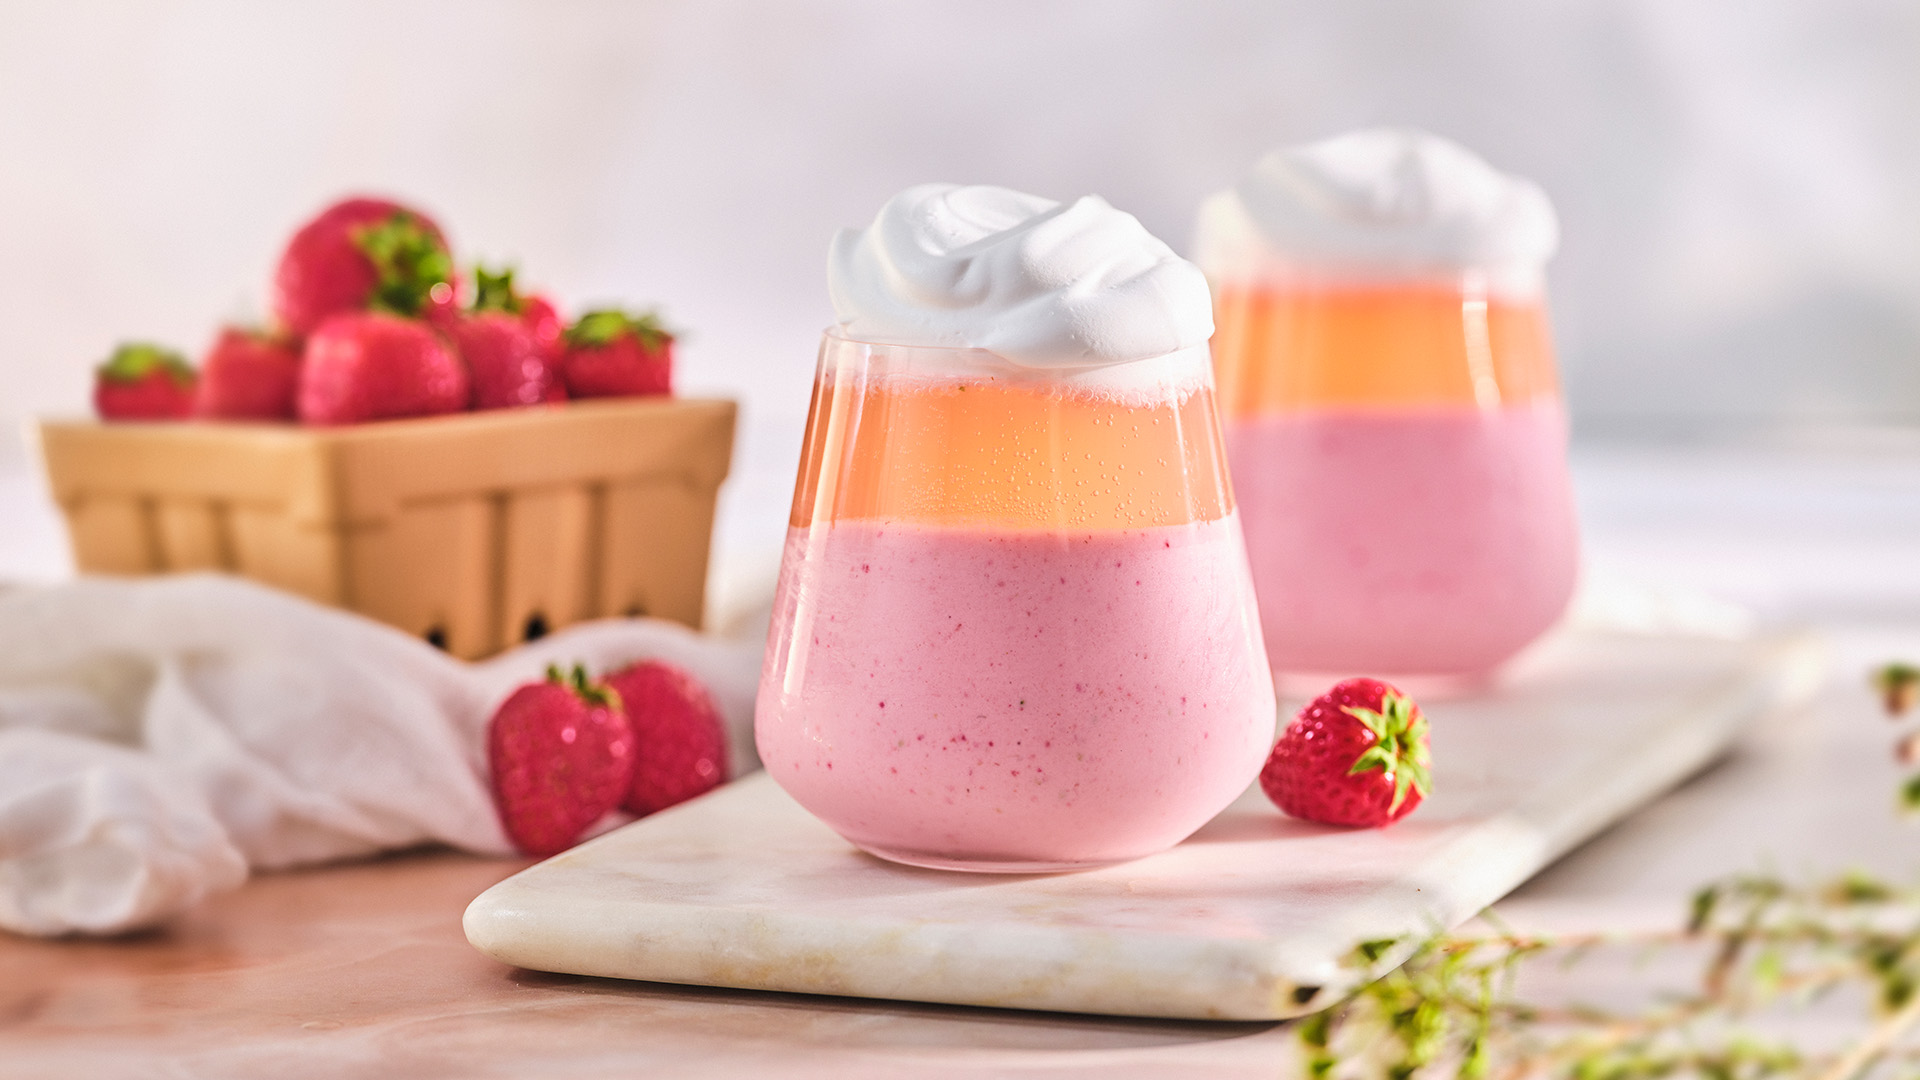 Two stemless wine glasses containing strawberry milkshake topped with Rosé and a dollop of whipped cream next to a small brown fruit pint full of strawberries.